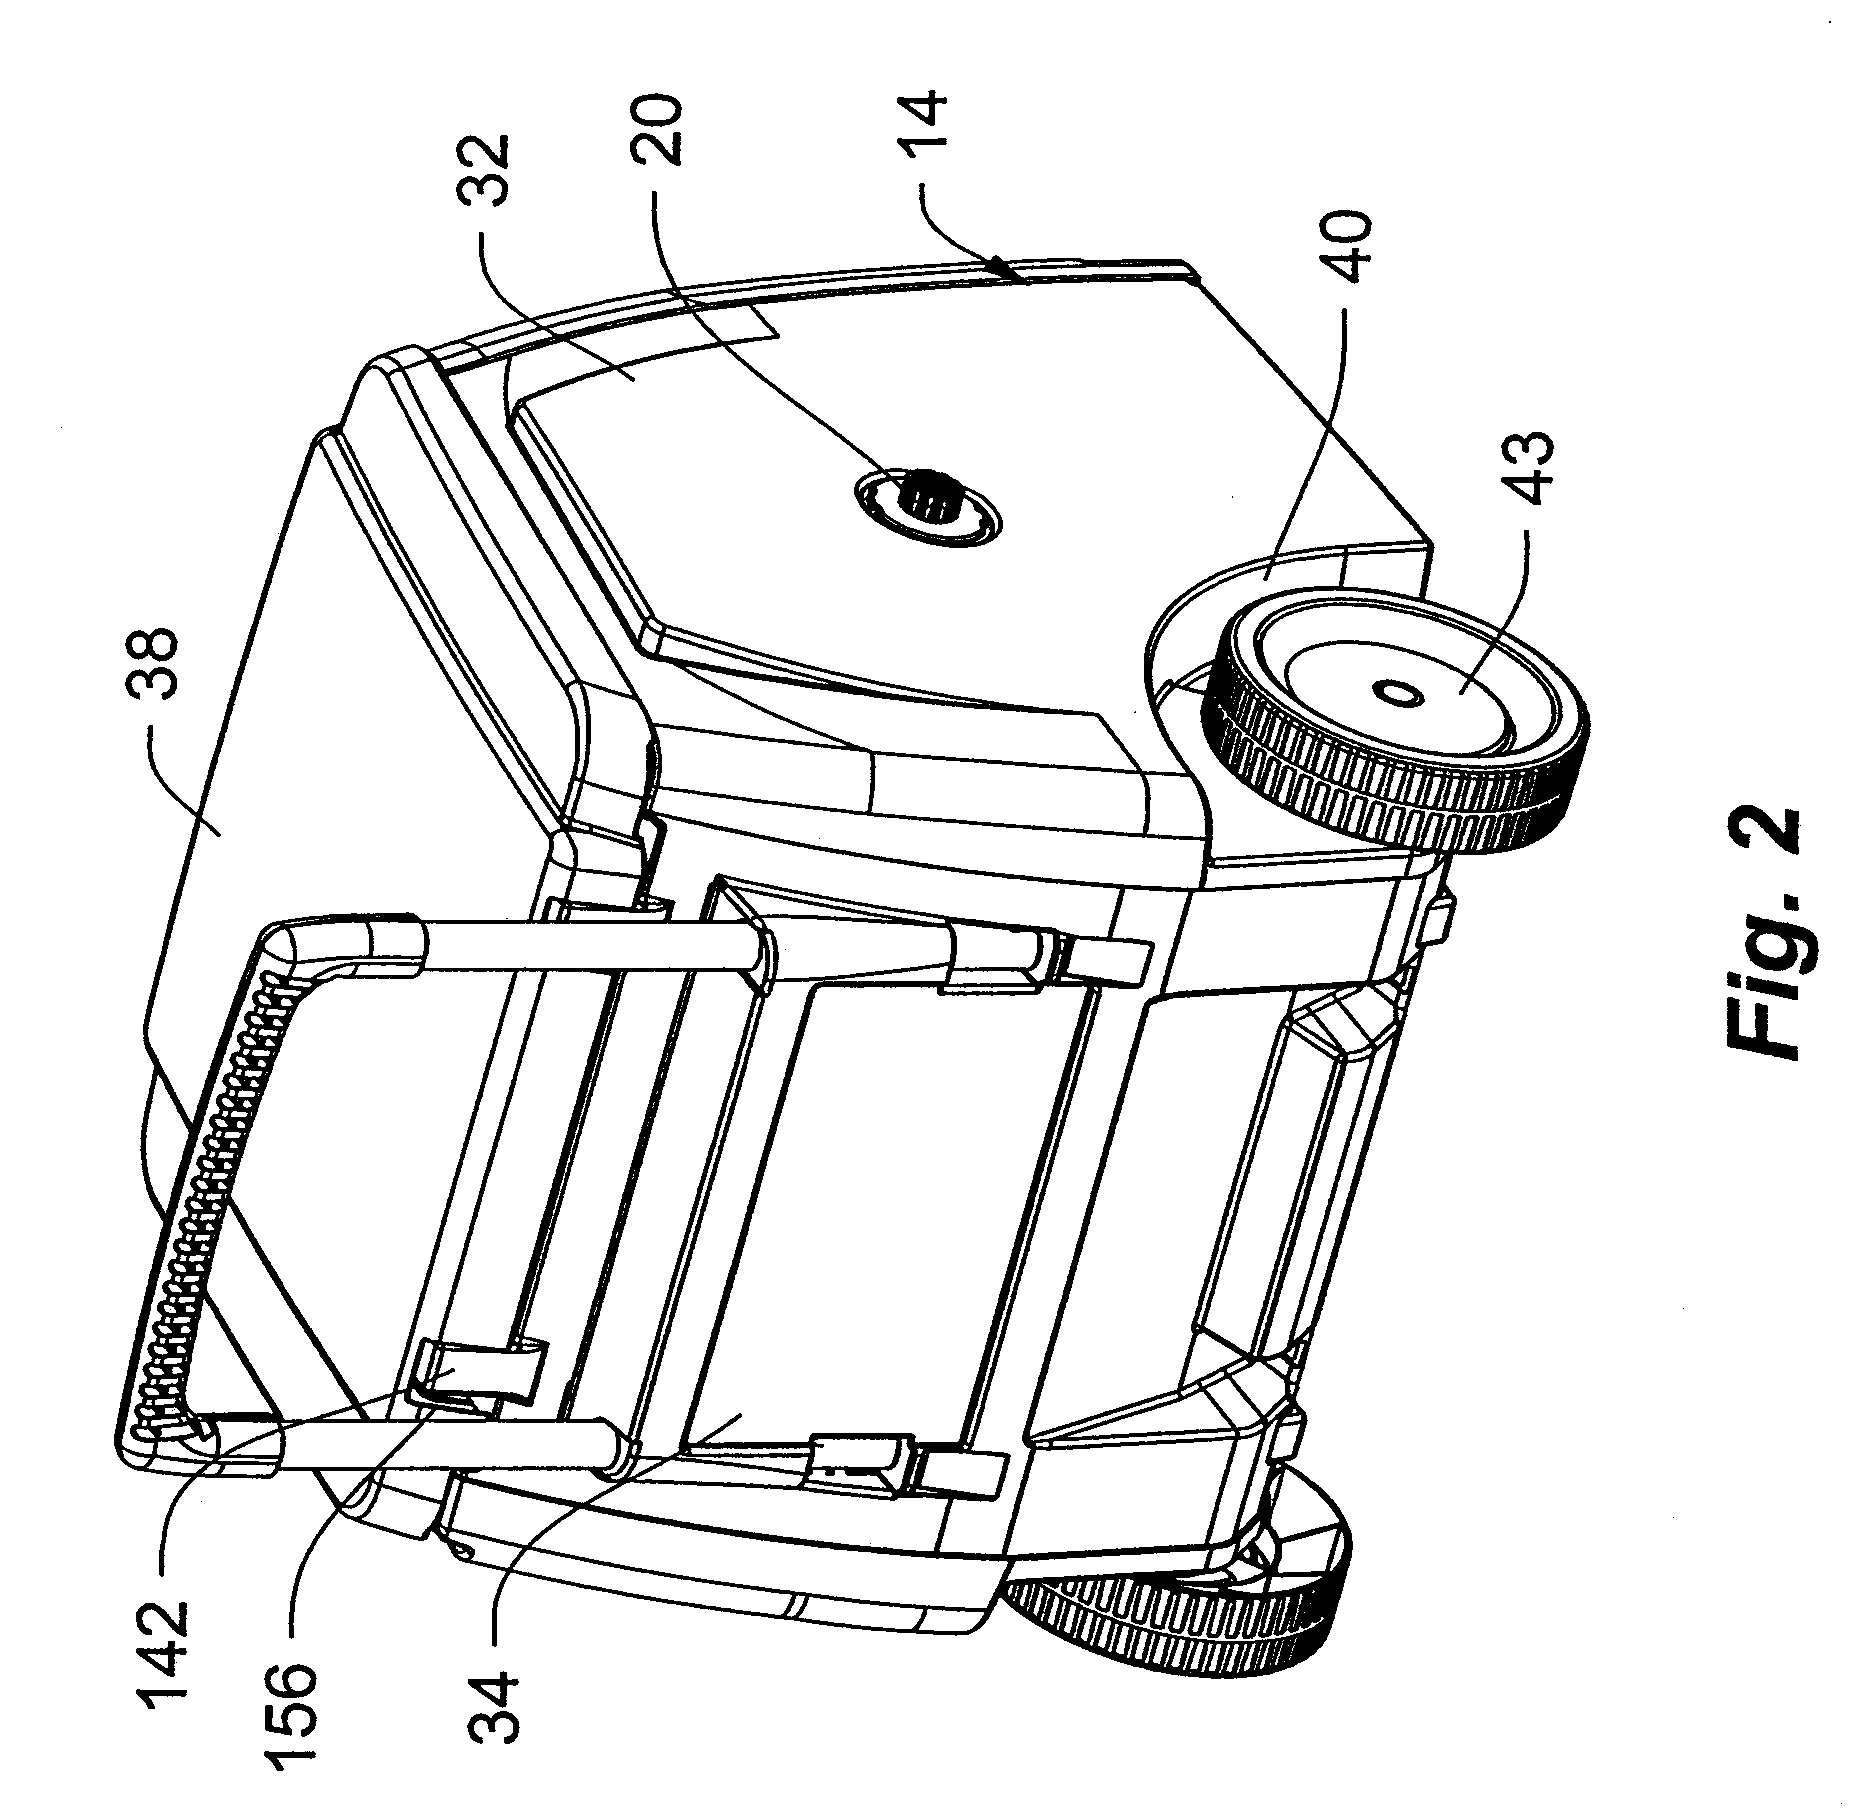 Direct current powered hose rewinding apparatus